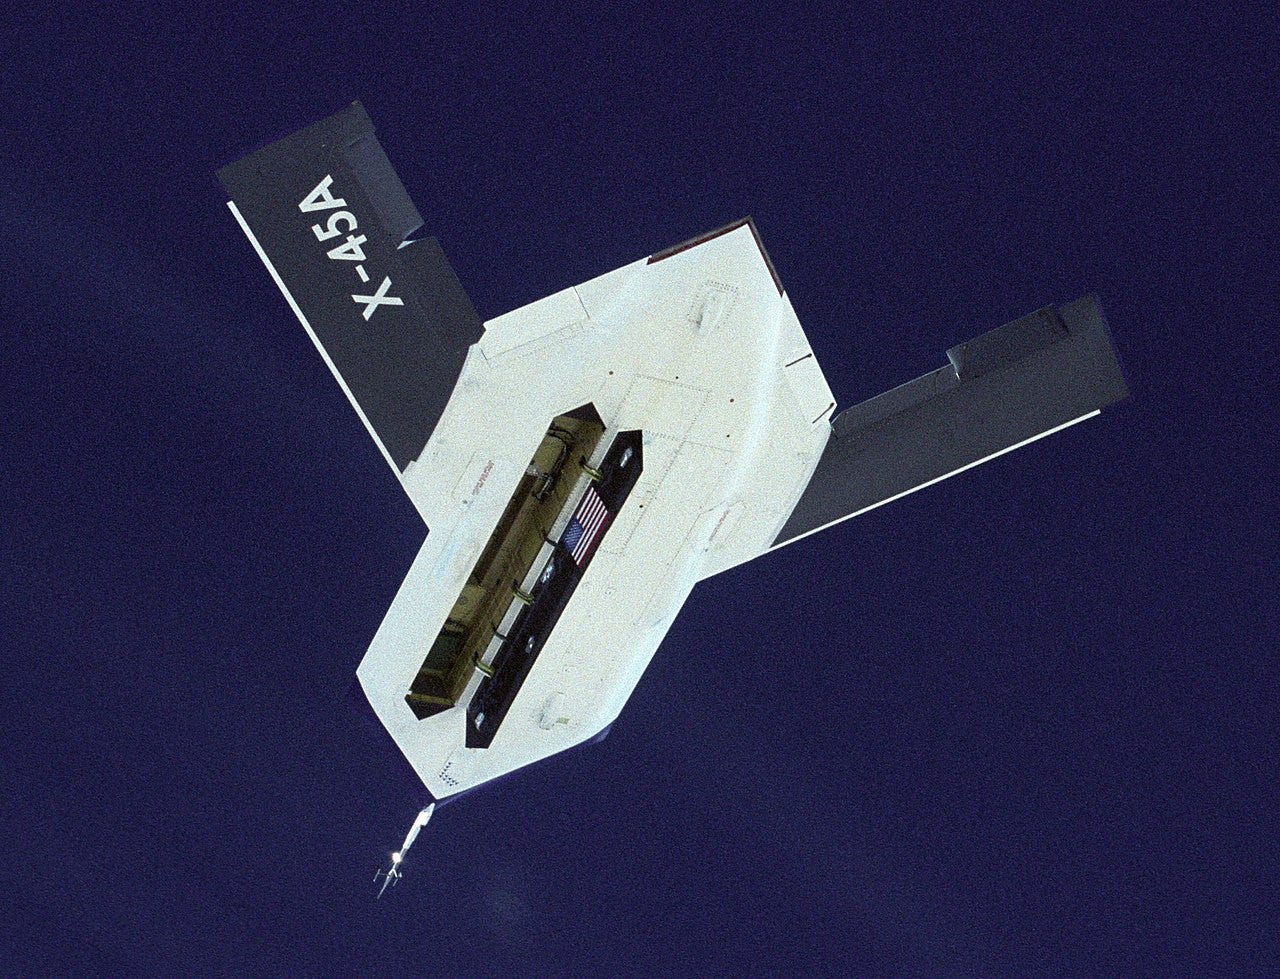 A sharply angular drone in flight against a grainy blue sky, with bomb bay open.